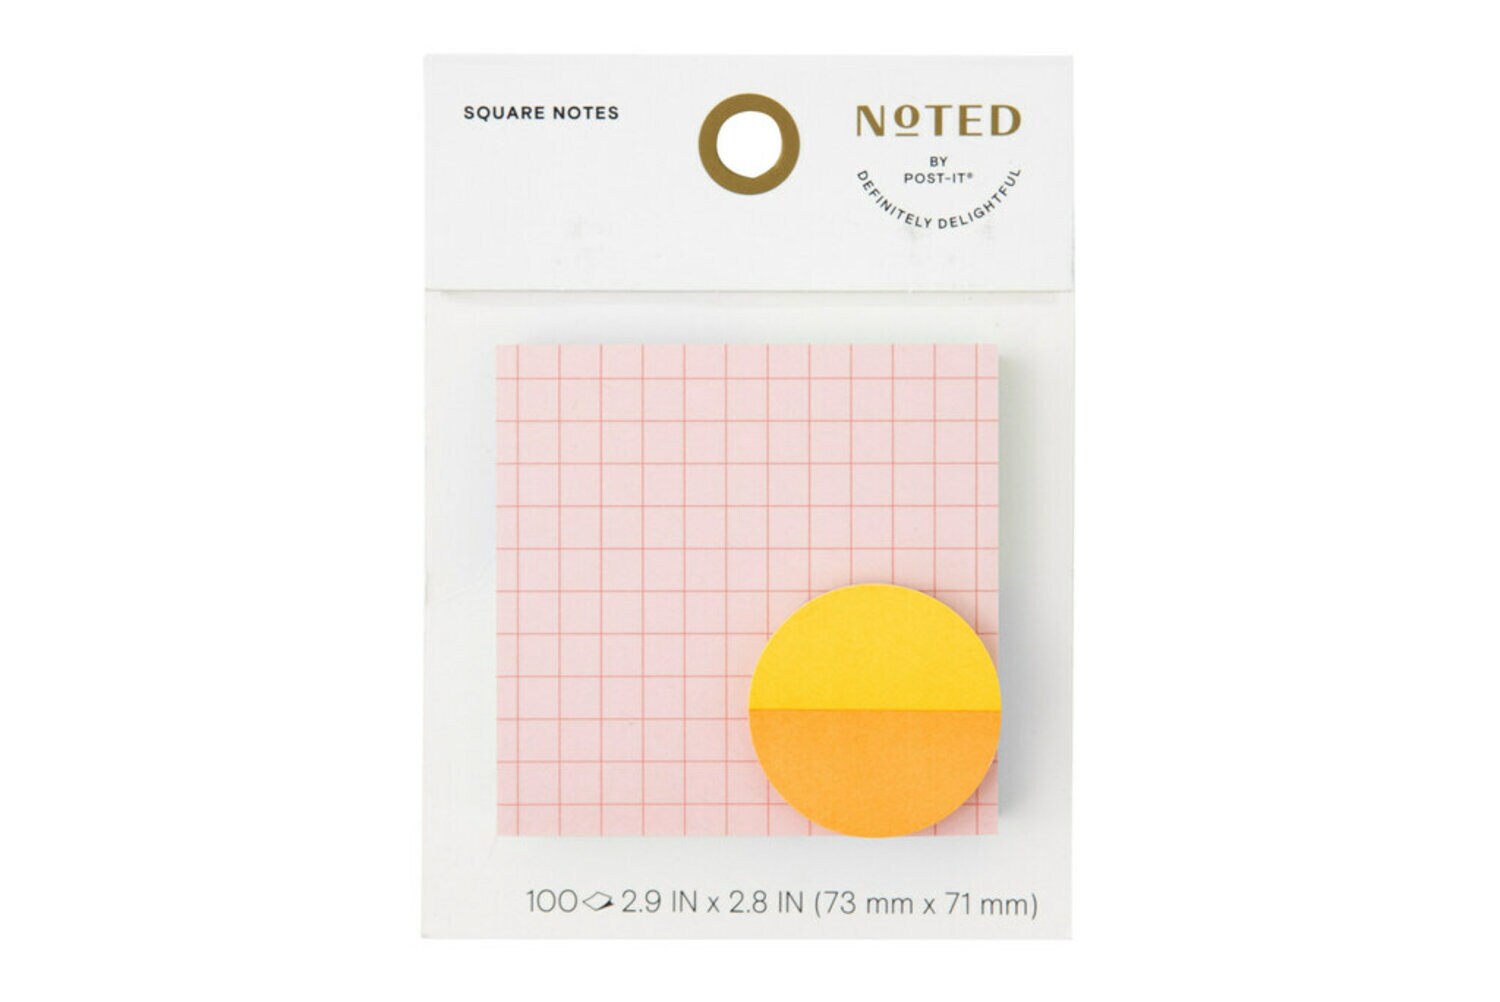 7100292495 - Post-it Square & Round Mini Notes NTDW-331-1, 2.9 in x 2.8in 100 sheet/pad 1.4in x 1.4in 50 sheet/pad